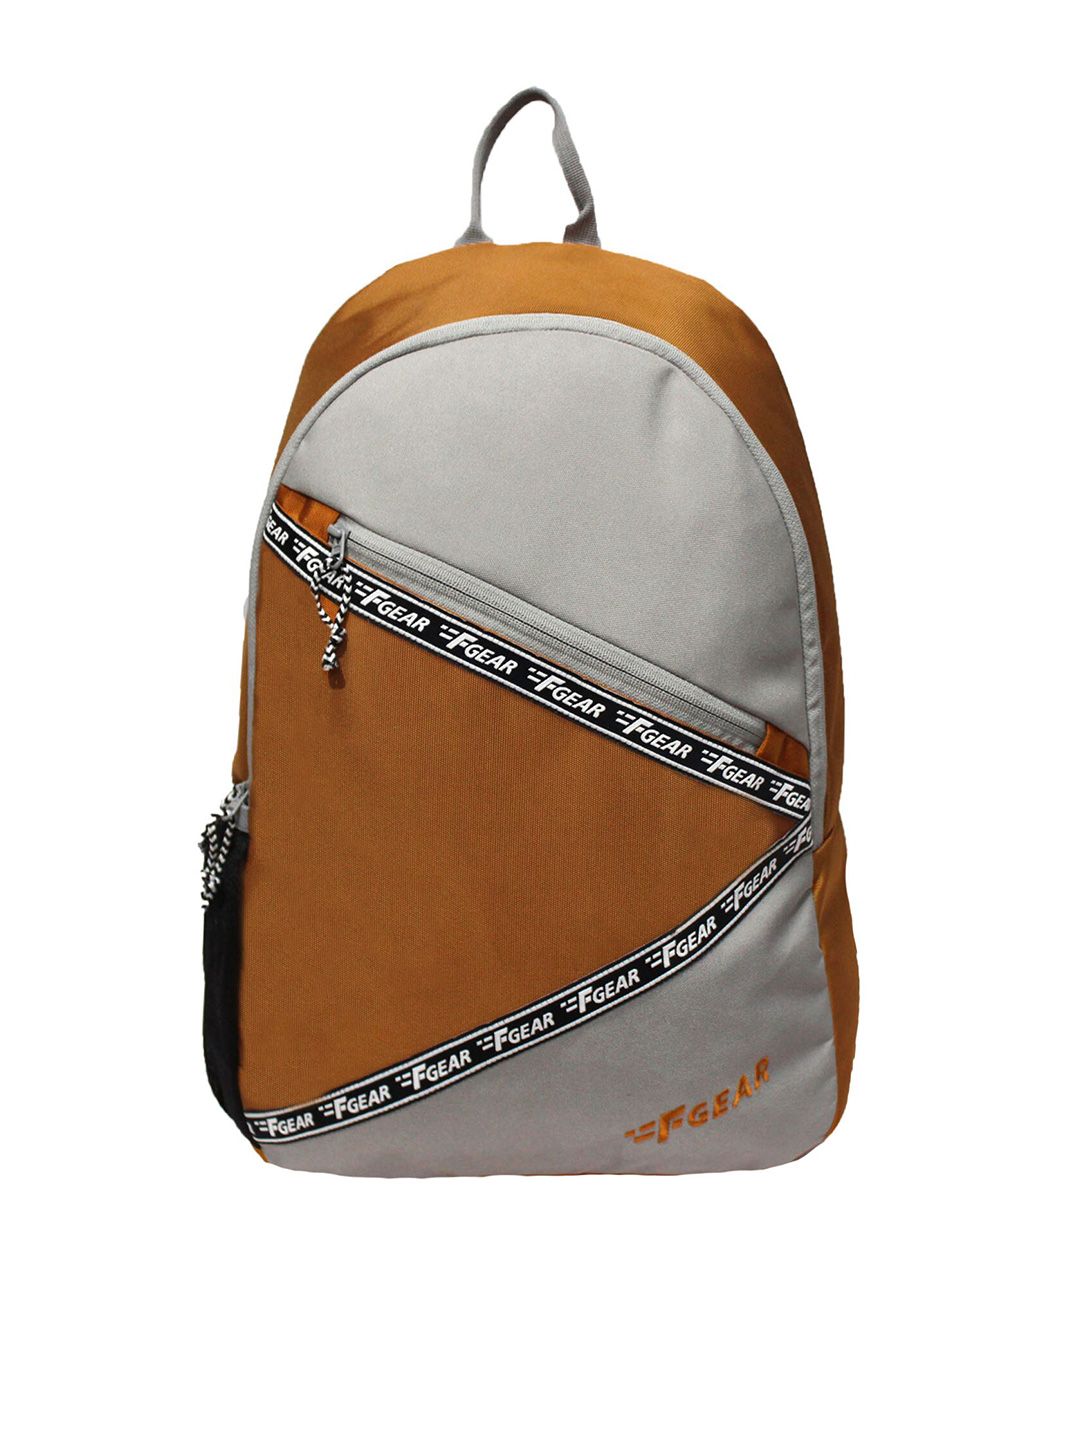 F Gear Unisex Gold-Toned & Grey Colourblocked Backpack Price in India